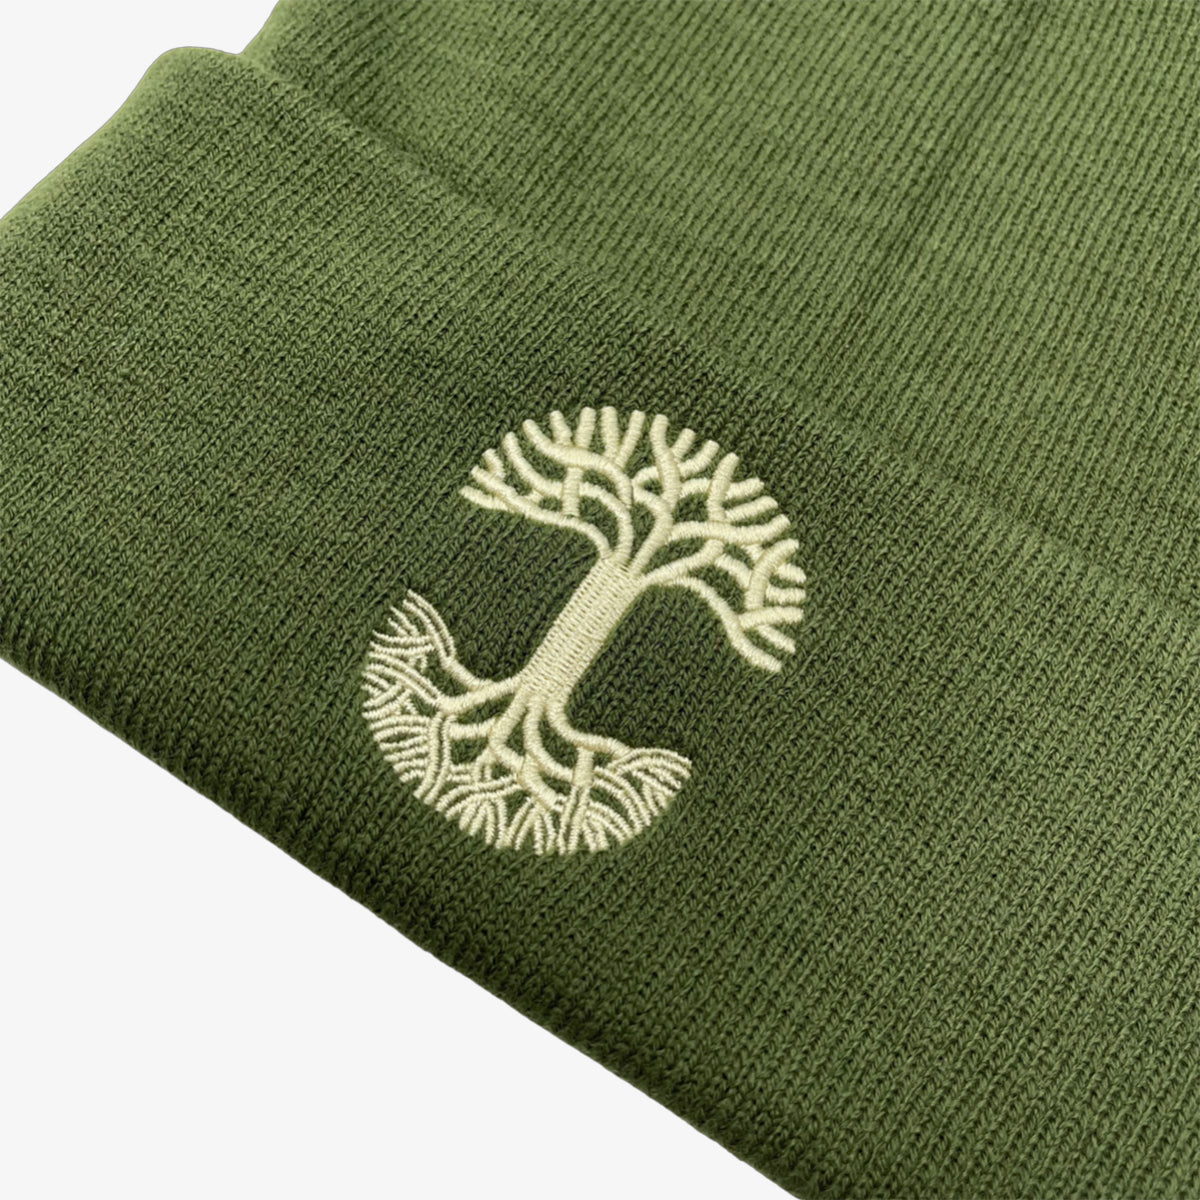 Close-up of yellow embroidered Oaklandish tree logo on the cuff of an olive green beanie.